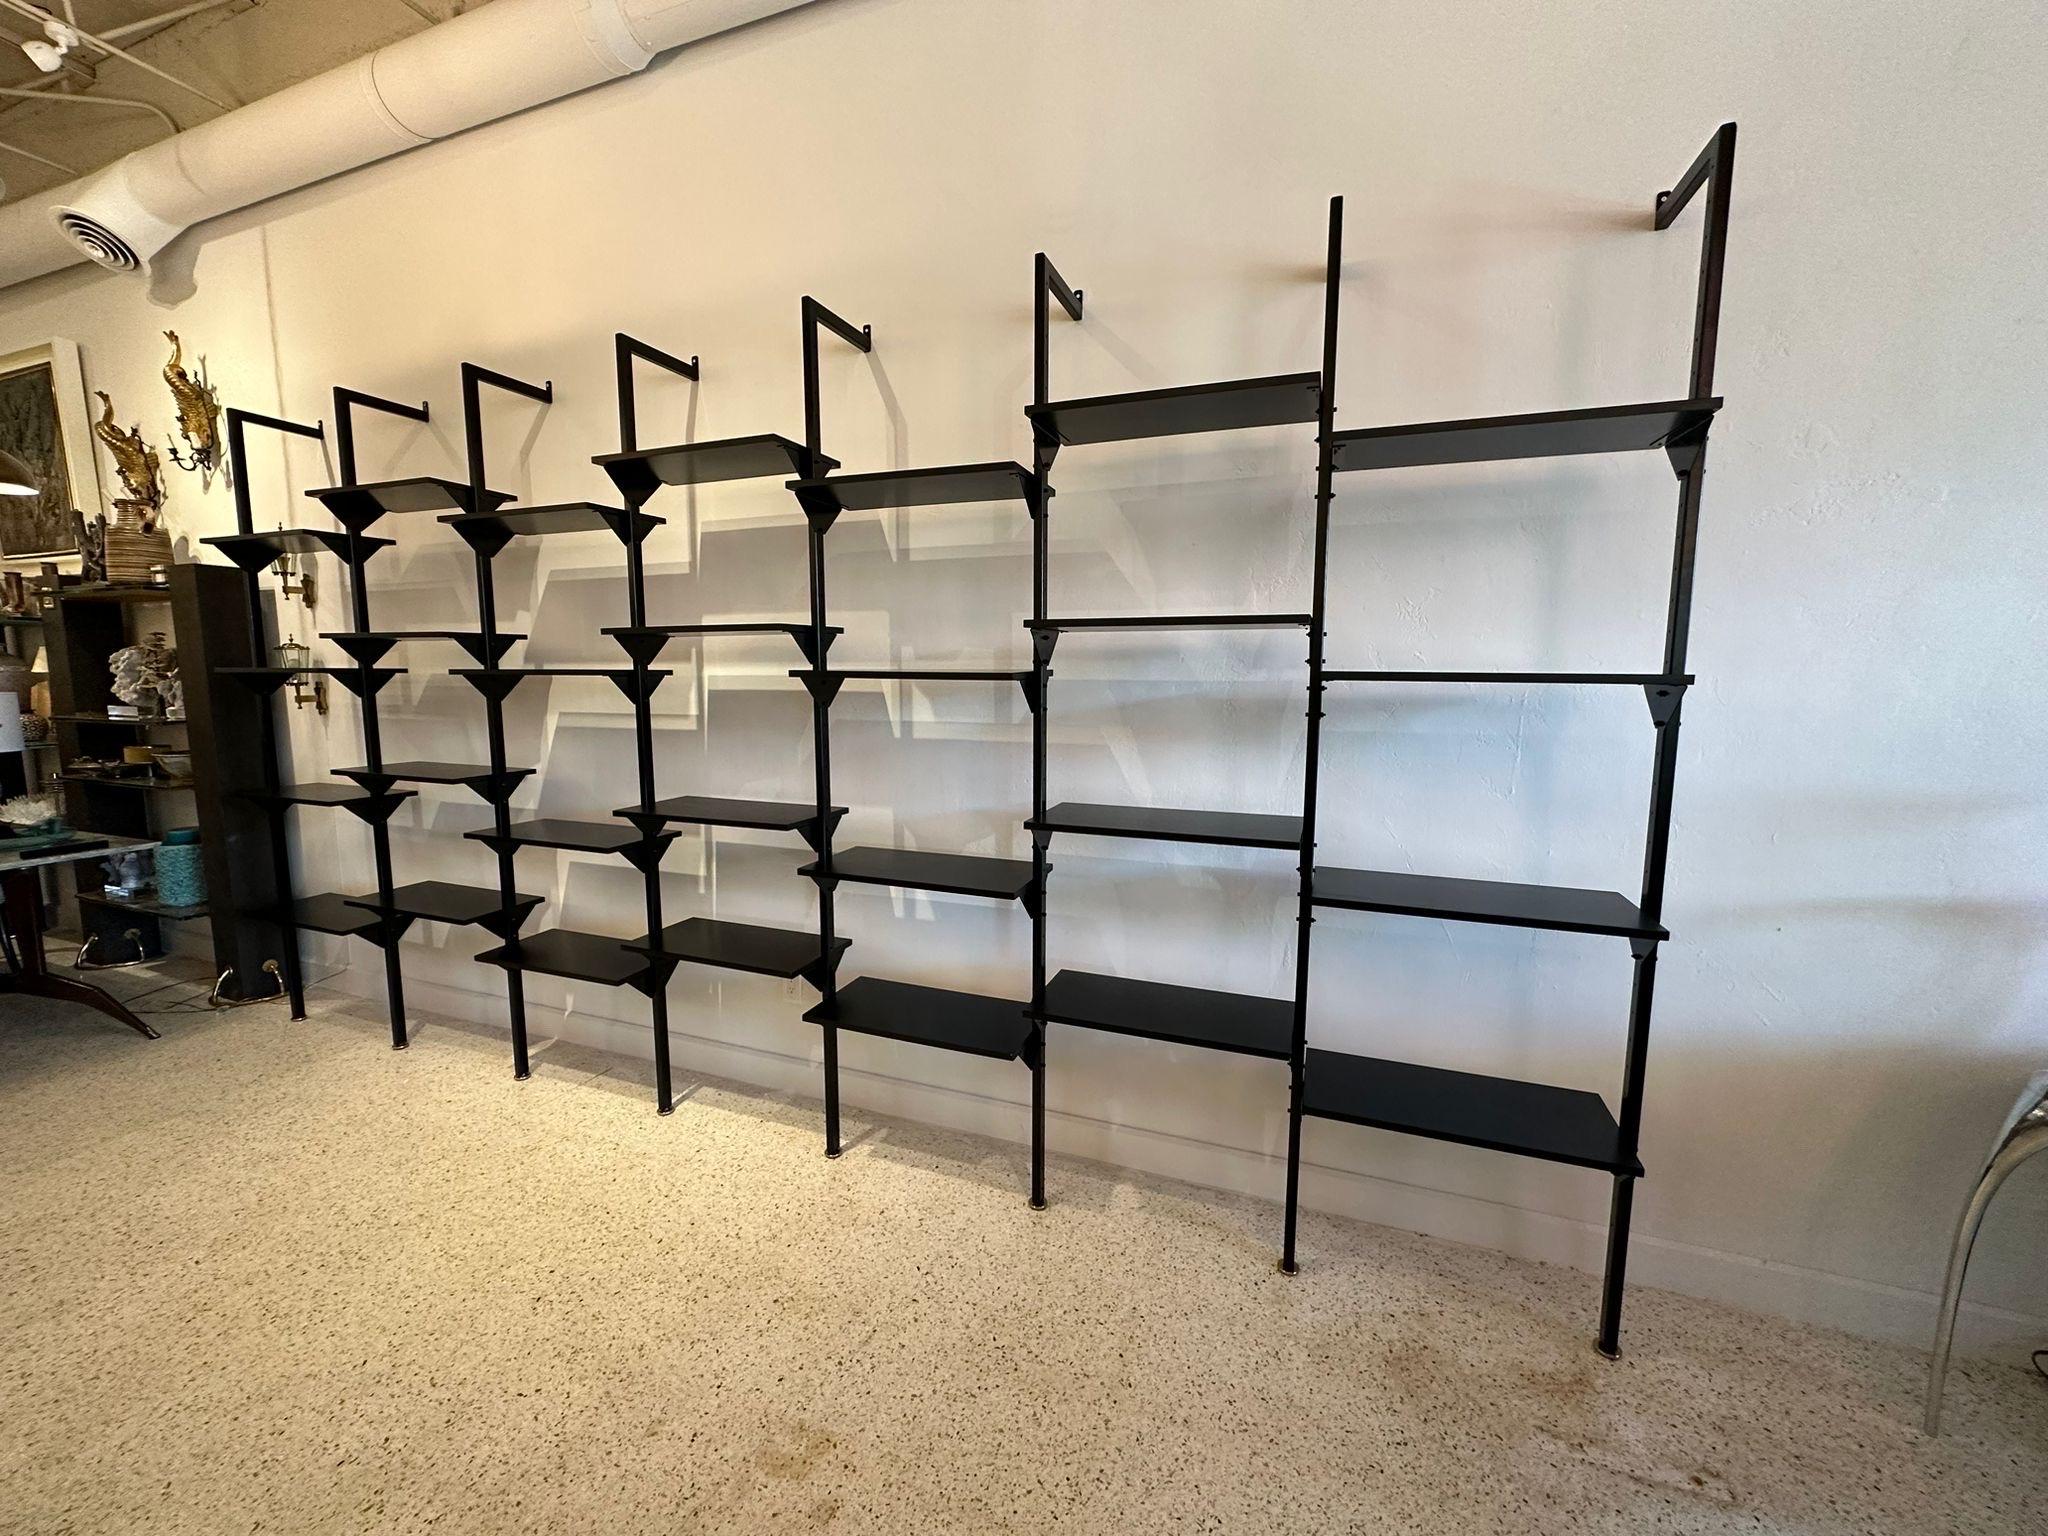 Rare Industrial Italian wall-mounted library or shelving system that is completely customize-able to your design needs. A very long shelving unit fitted with eight (8) powder coated metal posts for SEVEN (7) sections. Posts have gold plated